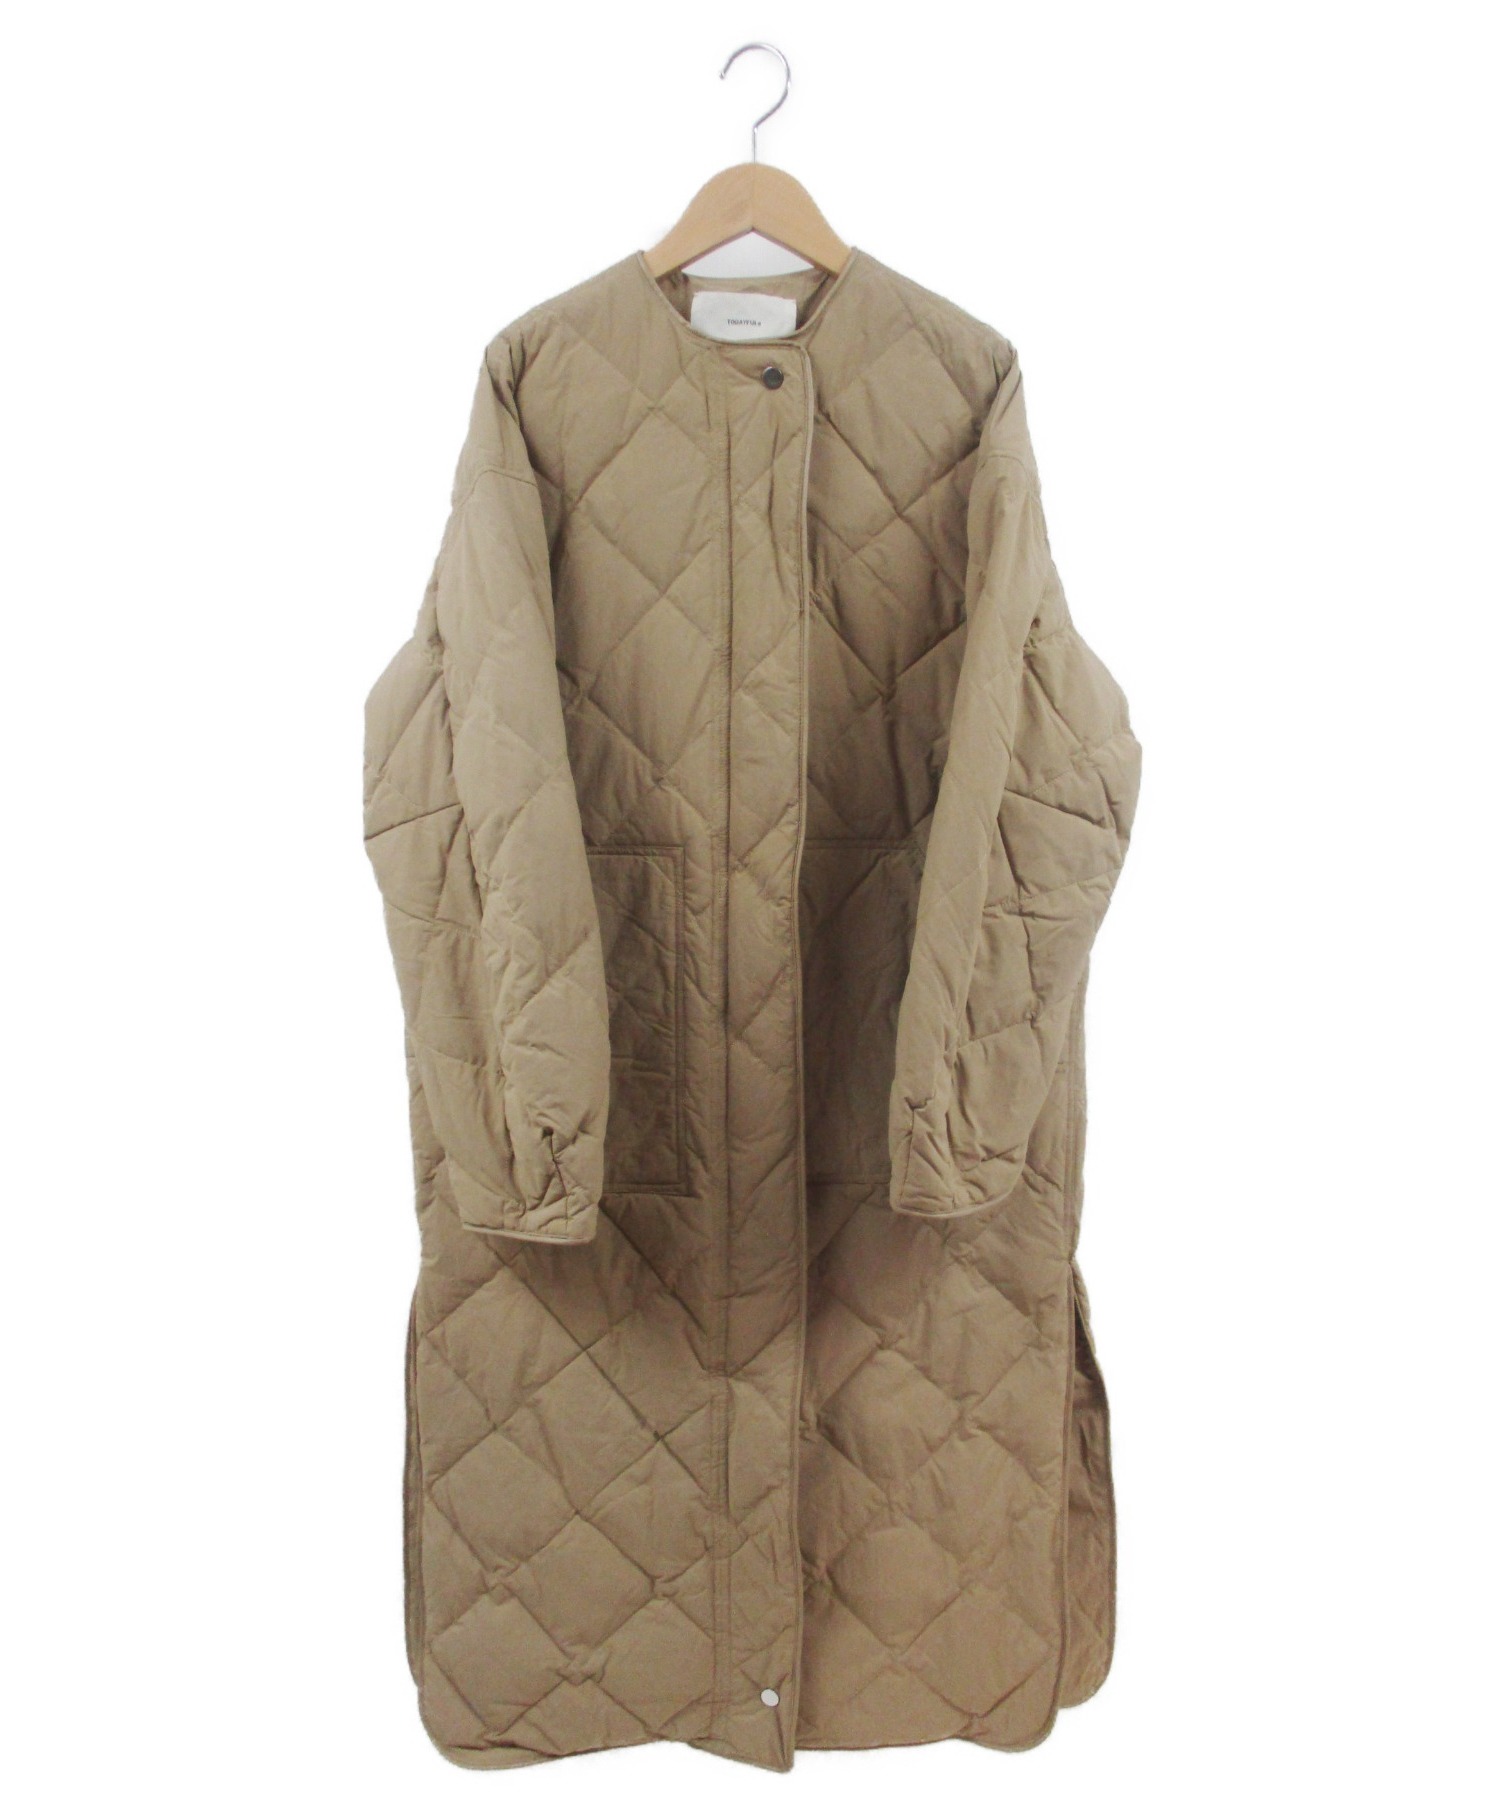 TODAYFUL Quilting Down Coat 38 エクリュ 試着のみ